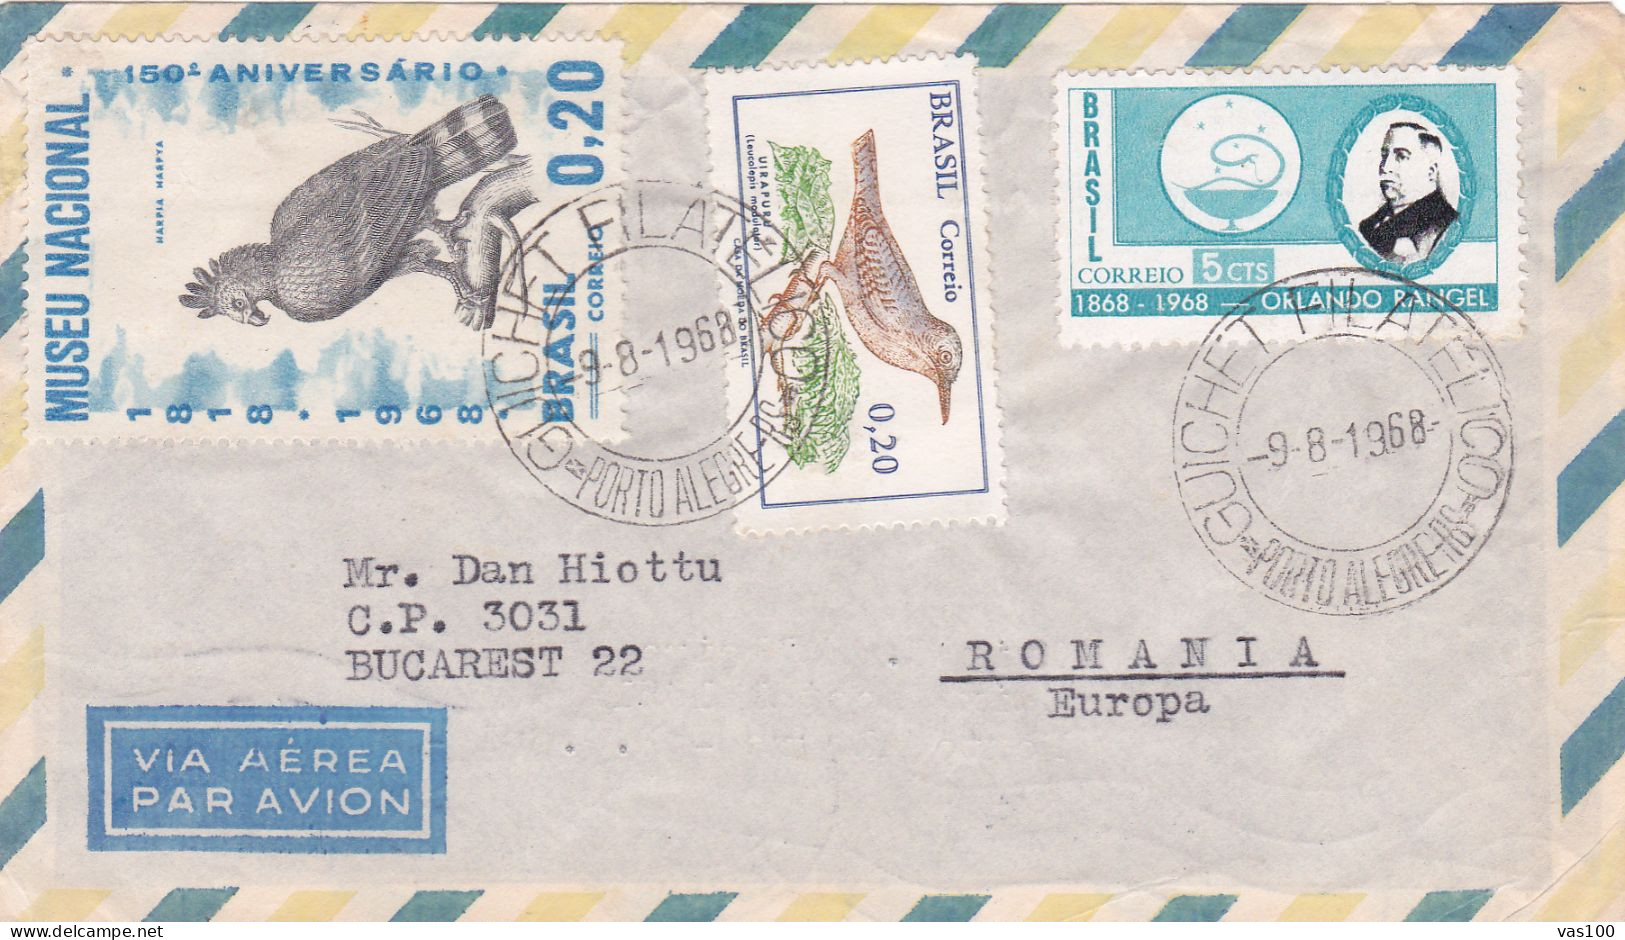 BIRDS STAMPS ON COVERS, POSTAL AEREO COVERS 1968,BRAZIL - Storia Postale